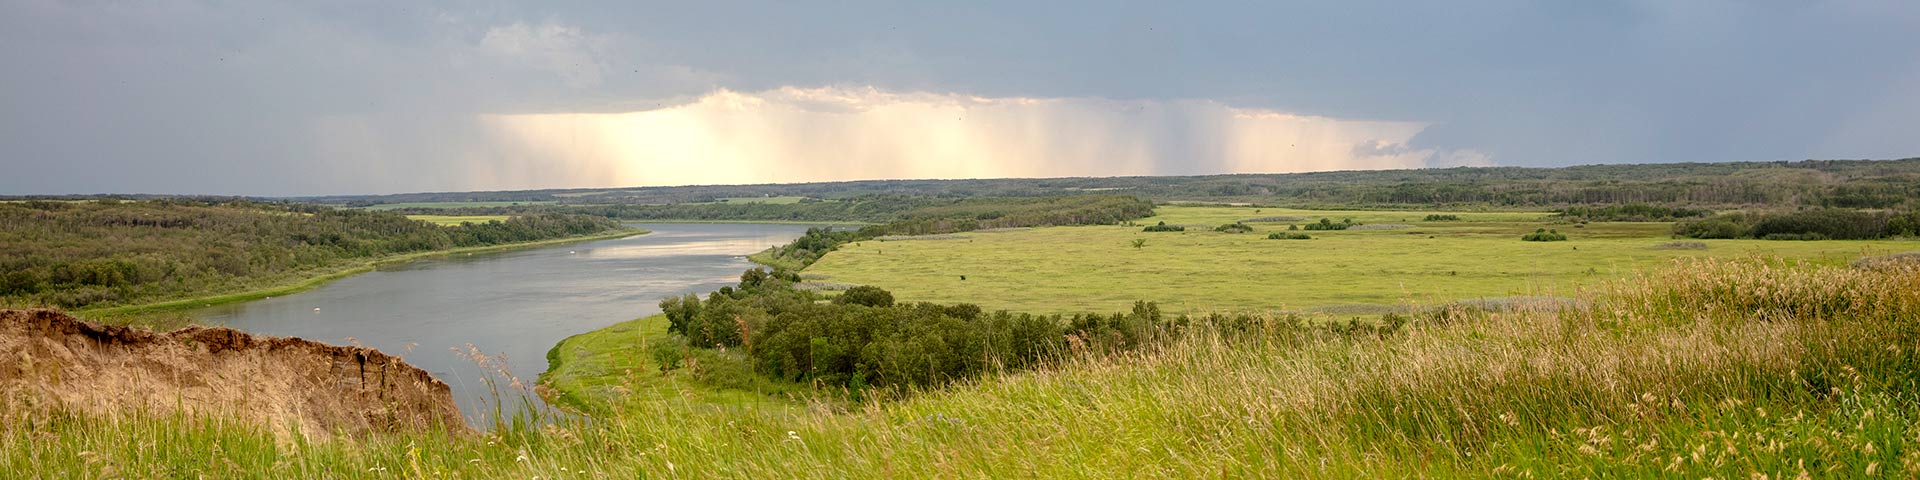 A view of the South Saskatchewan River from Batoche National Historic Site